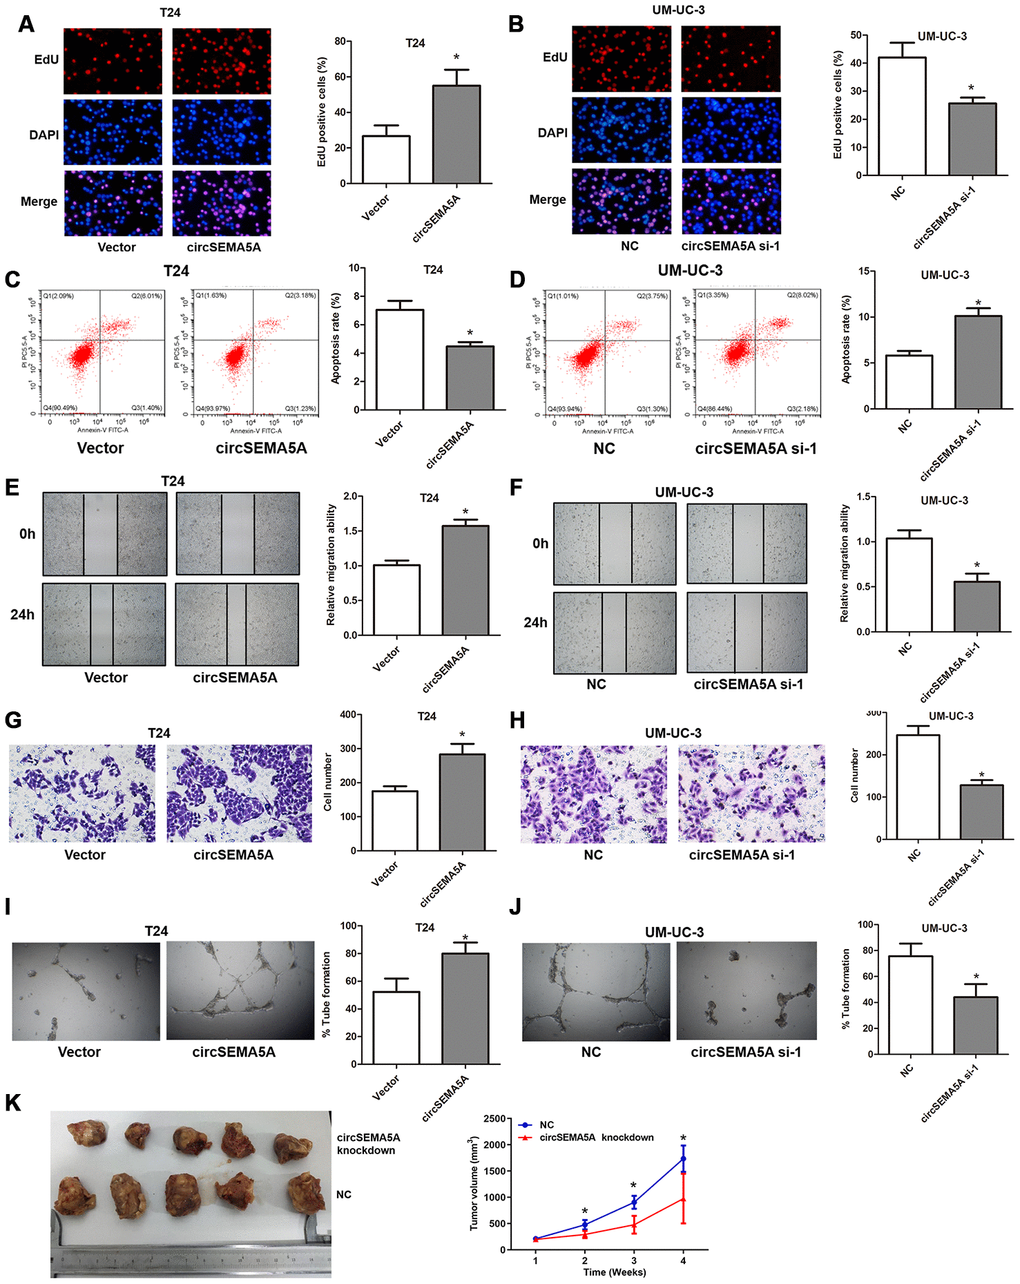 CircSEMA5A accelerates the oncogenic process of BC cells. (A–J) T24 cells were transfected with circSEMA5A overexpression plasmids and UM-UC-3 cells were transfected with circSEMA5A siRNAs. (A and B) Cell proliferation was measured by EdU assays; (C and D) cell apoptosis was detected by flow cytometry; (E and F) cell migration was assessed using wound-healing assays; (G and H) cell invasion was evaluated by transwell assays; (I and J) angiogenesis capability was assessed by tube formation assay. (K) Xenograft assay assessing the effect of circSEMA5A knockdown on tumor growth in vivo. Data are presented as mean ± SD. *P 